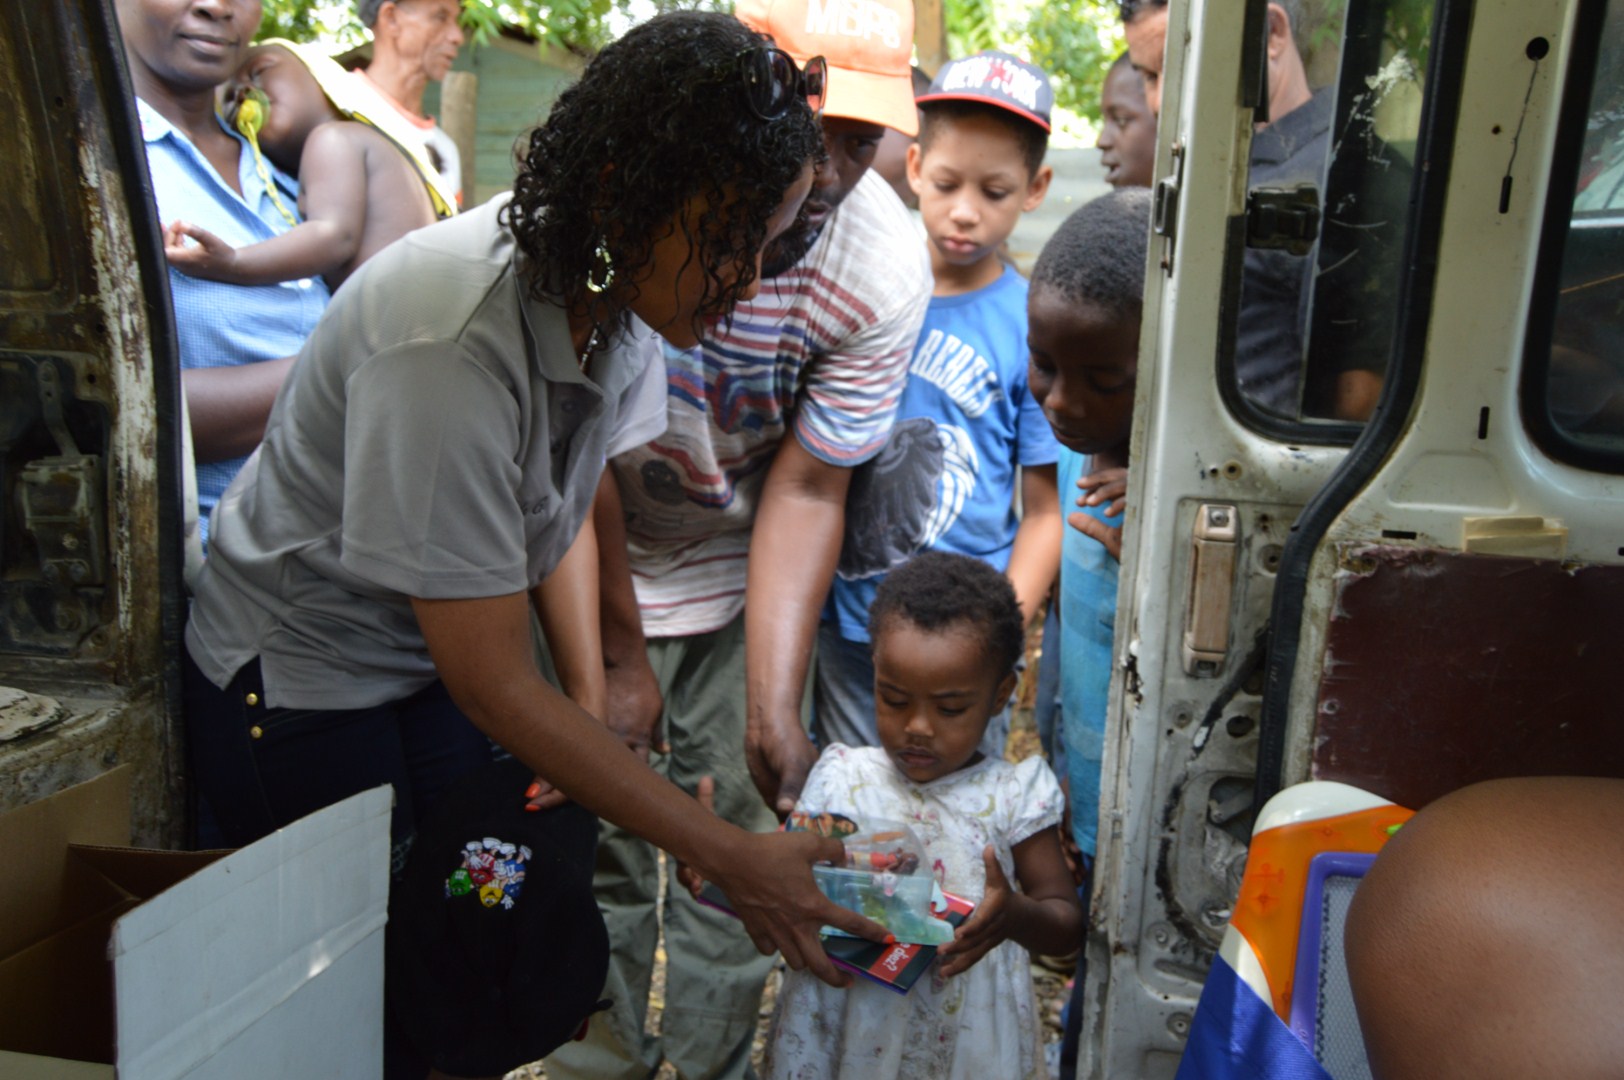 Our staff giving a toy to a little girl in a dress outside the car; children in line behind her